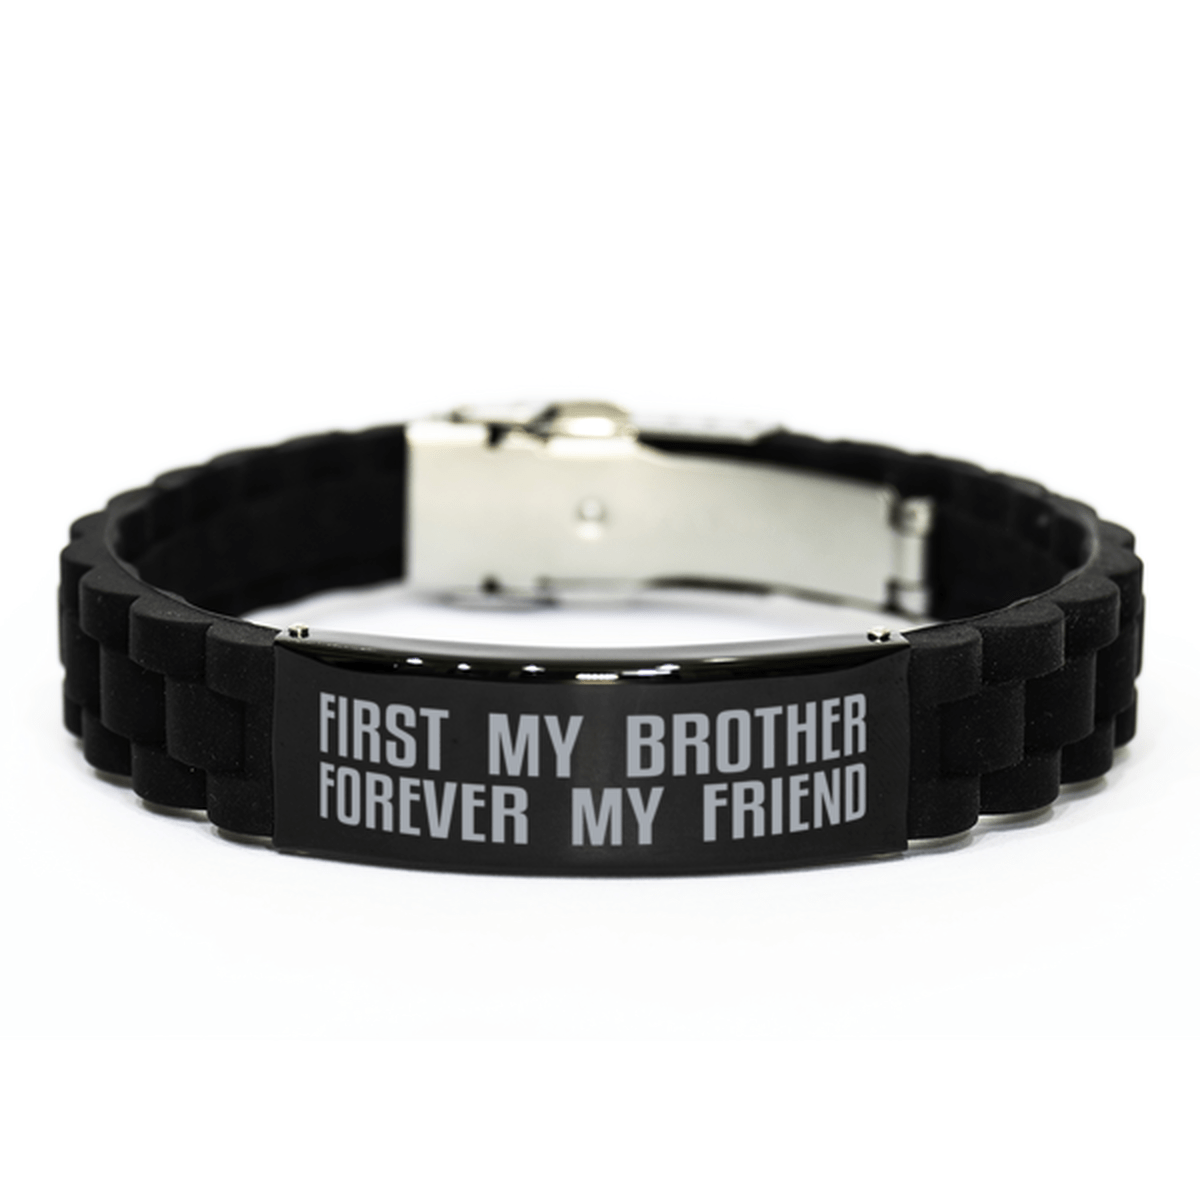 Unique Brother Bracelet, First My Brother Forever My Friend, Best Gift for Brother Birthday, Christmas